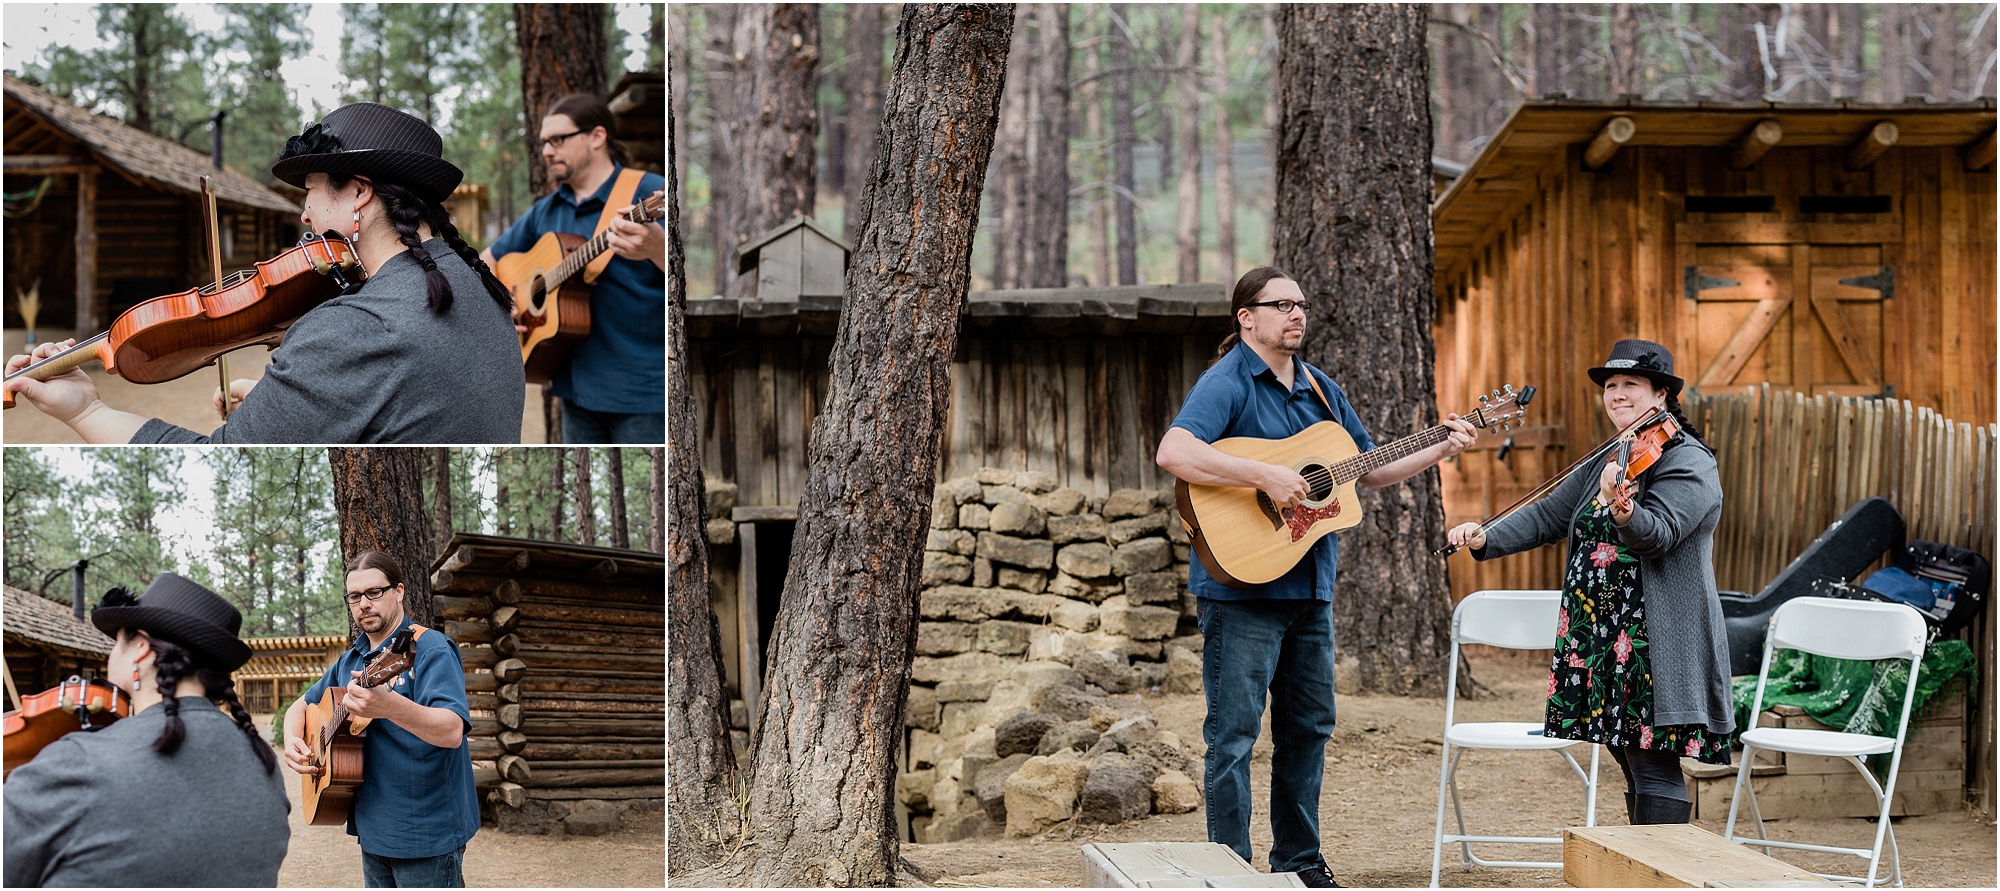 Bend, Oregon's bluegrass band Moon Mountain Ramblers plays for the ceremony of this High Desert Museum homestead wedding. | Erica Swantek Photography